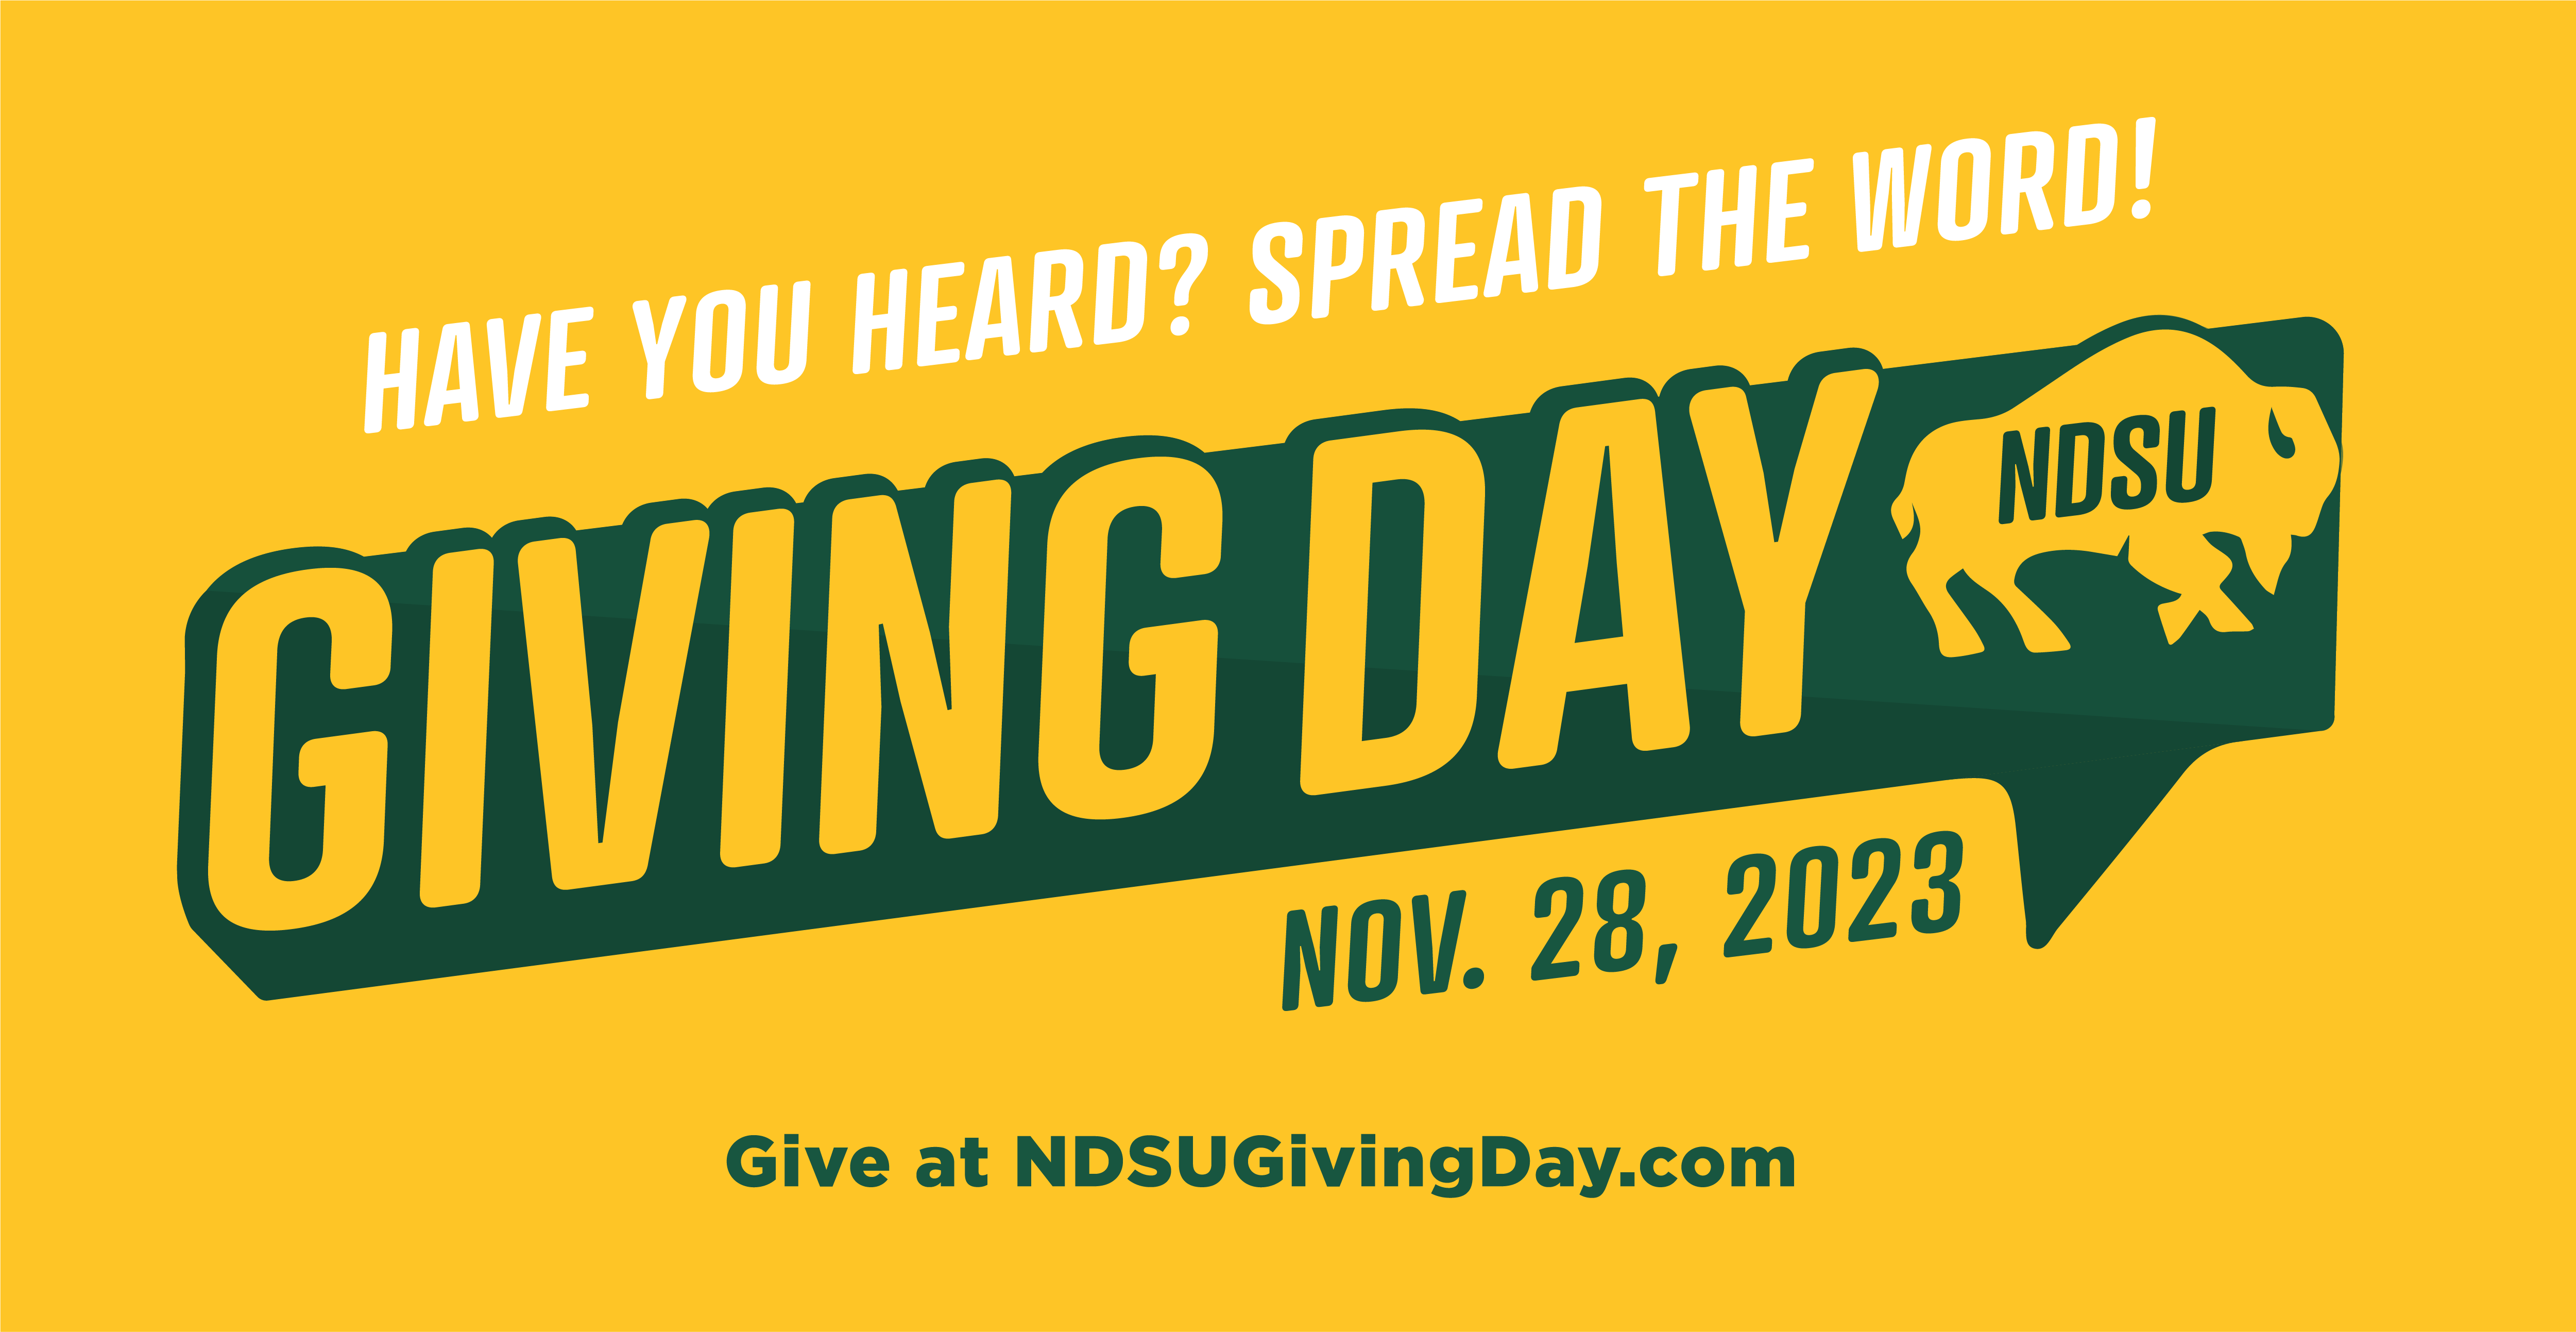 Banner: Have you heard? Spread the Word! | NDSU Giving Day | Nov. 28, 2023 | Give at NDSUGivingDay.com